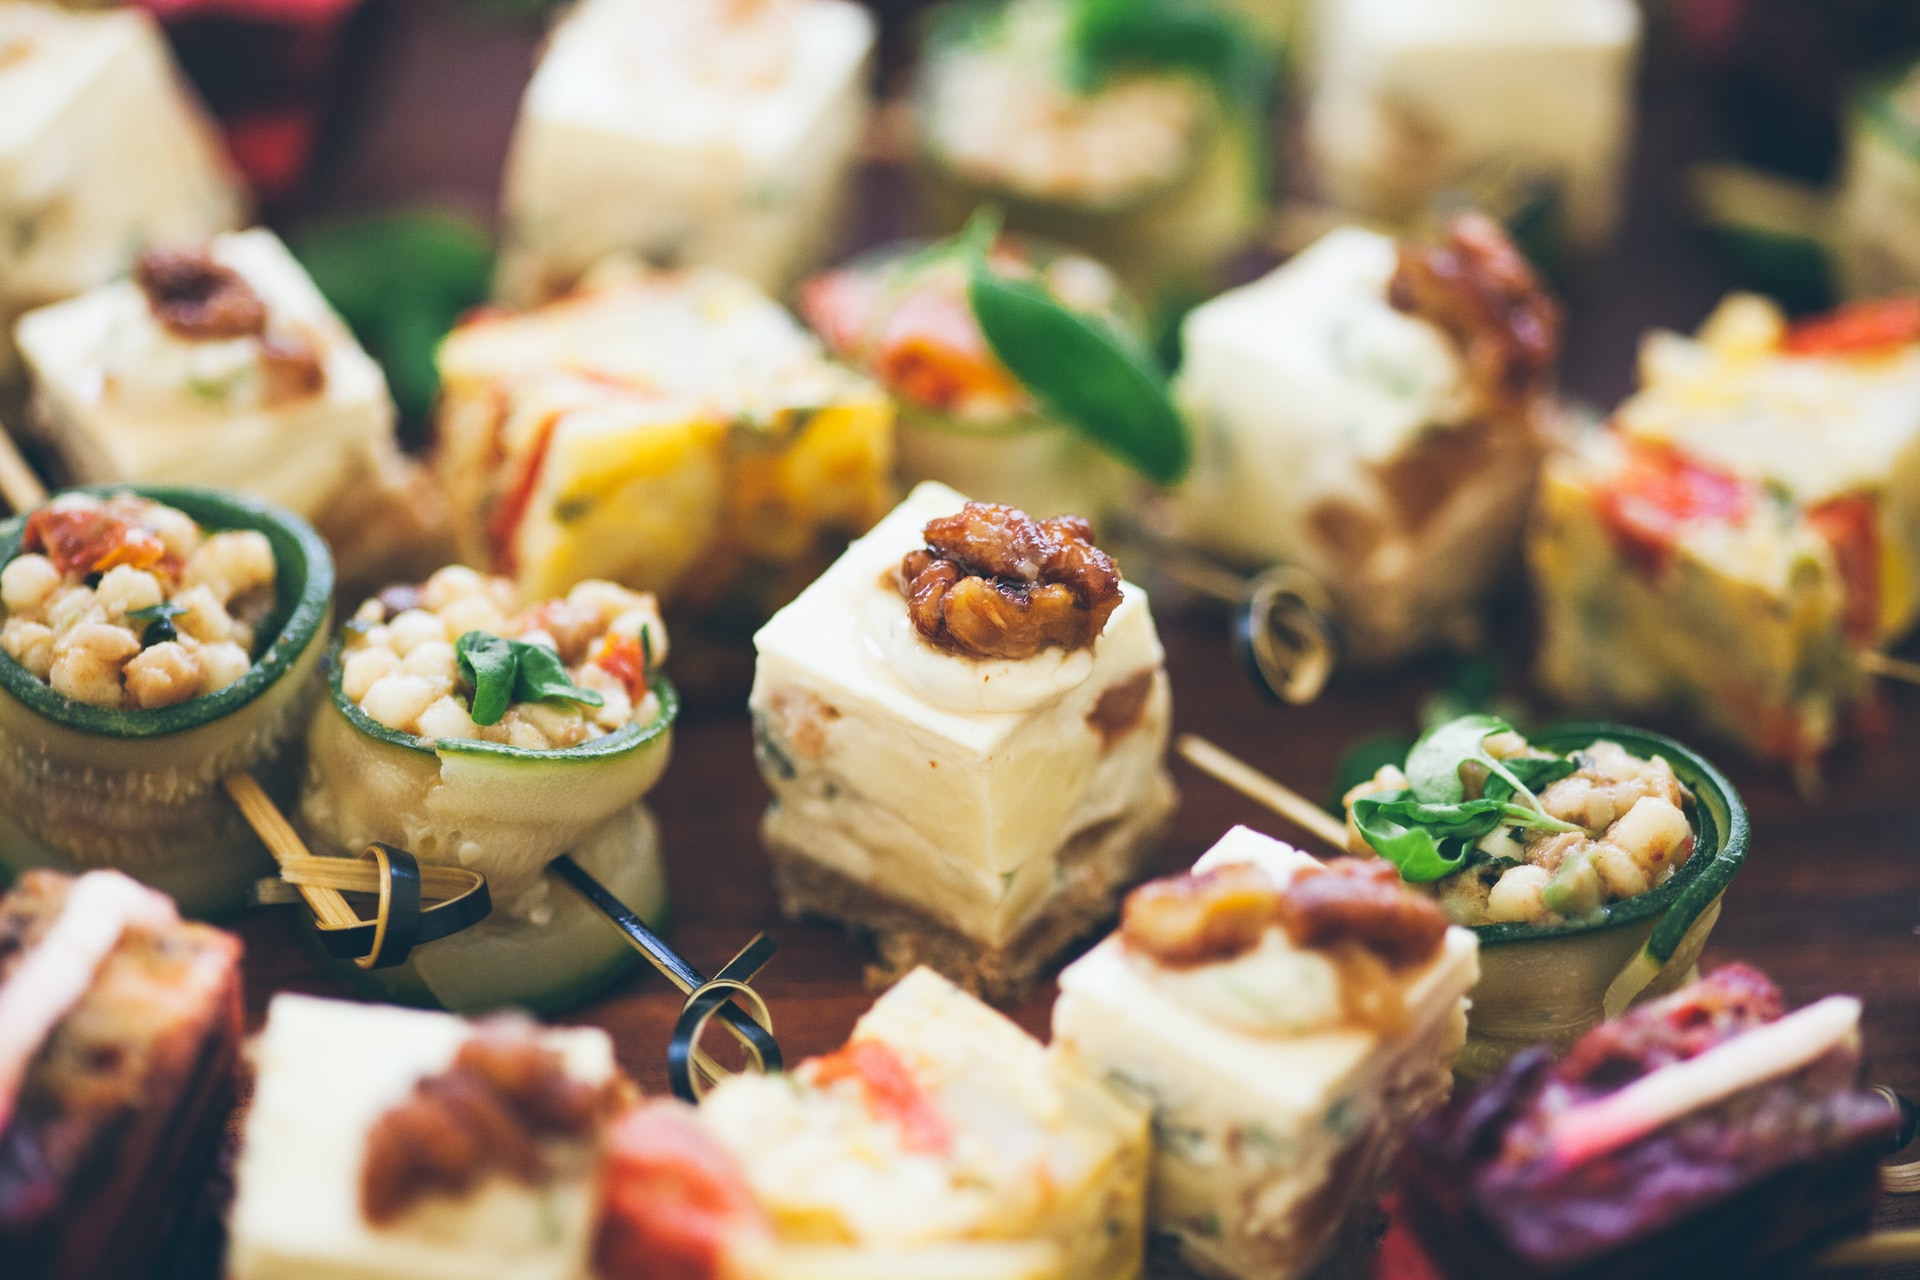 How to Cater Your Own Wedding for Cheap